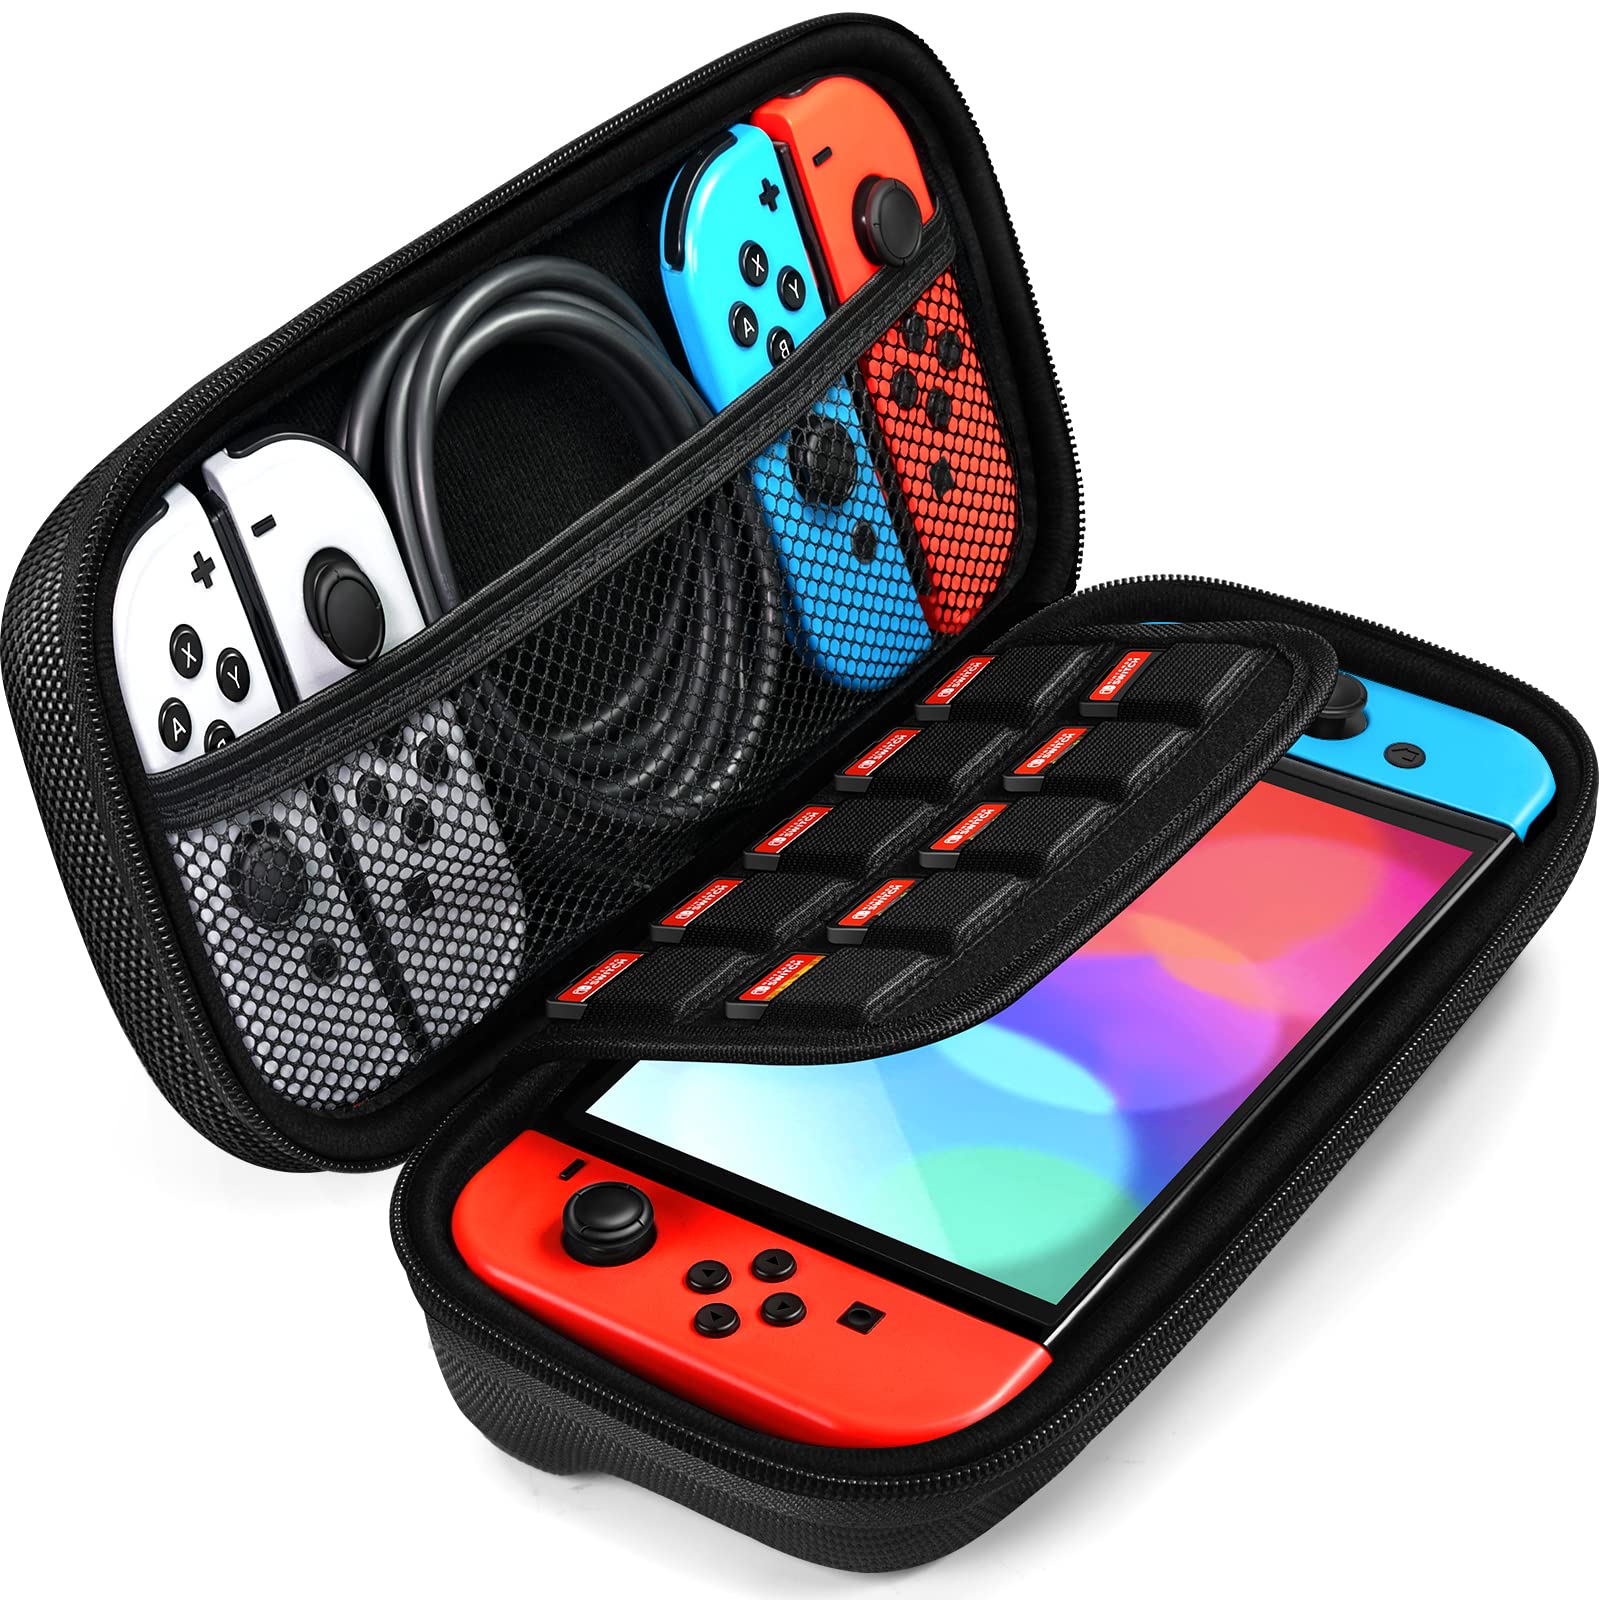 ivoler Carrying Case for Nintendo Switch and NEW Switch OLED Model(2021), Portable Hard Shell Pouch Carrying Travel Game Bag for Switch Accessories Holds 10 Game Cartridge